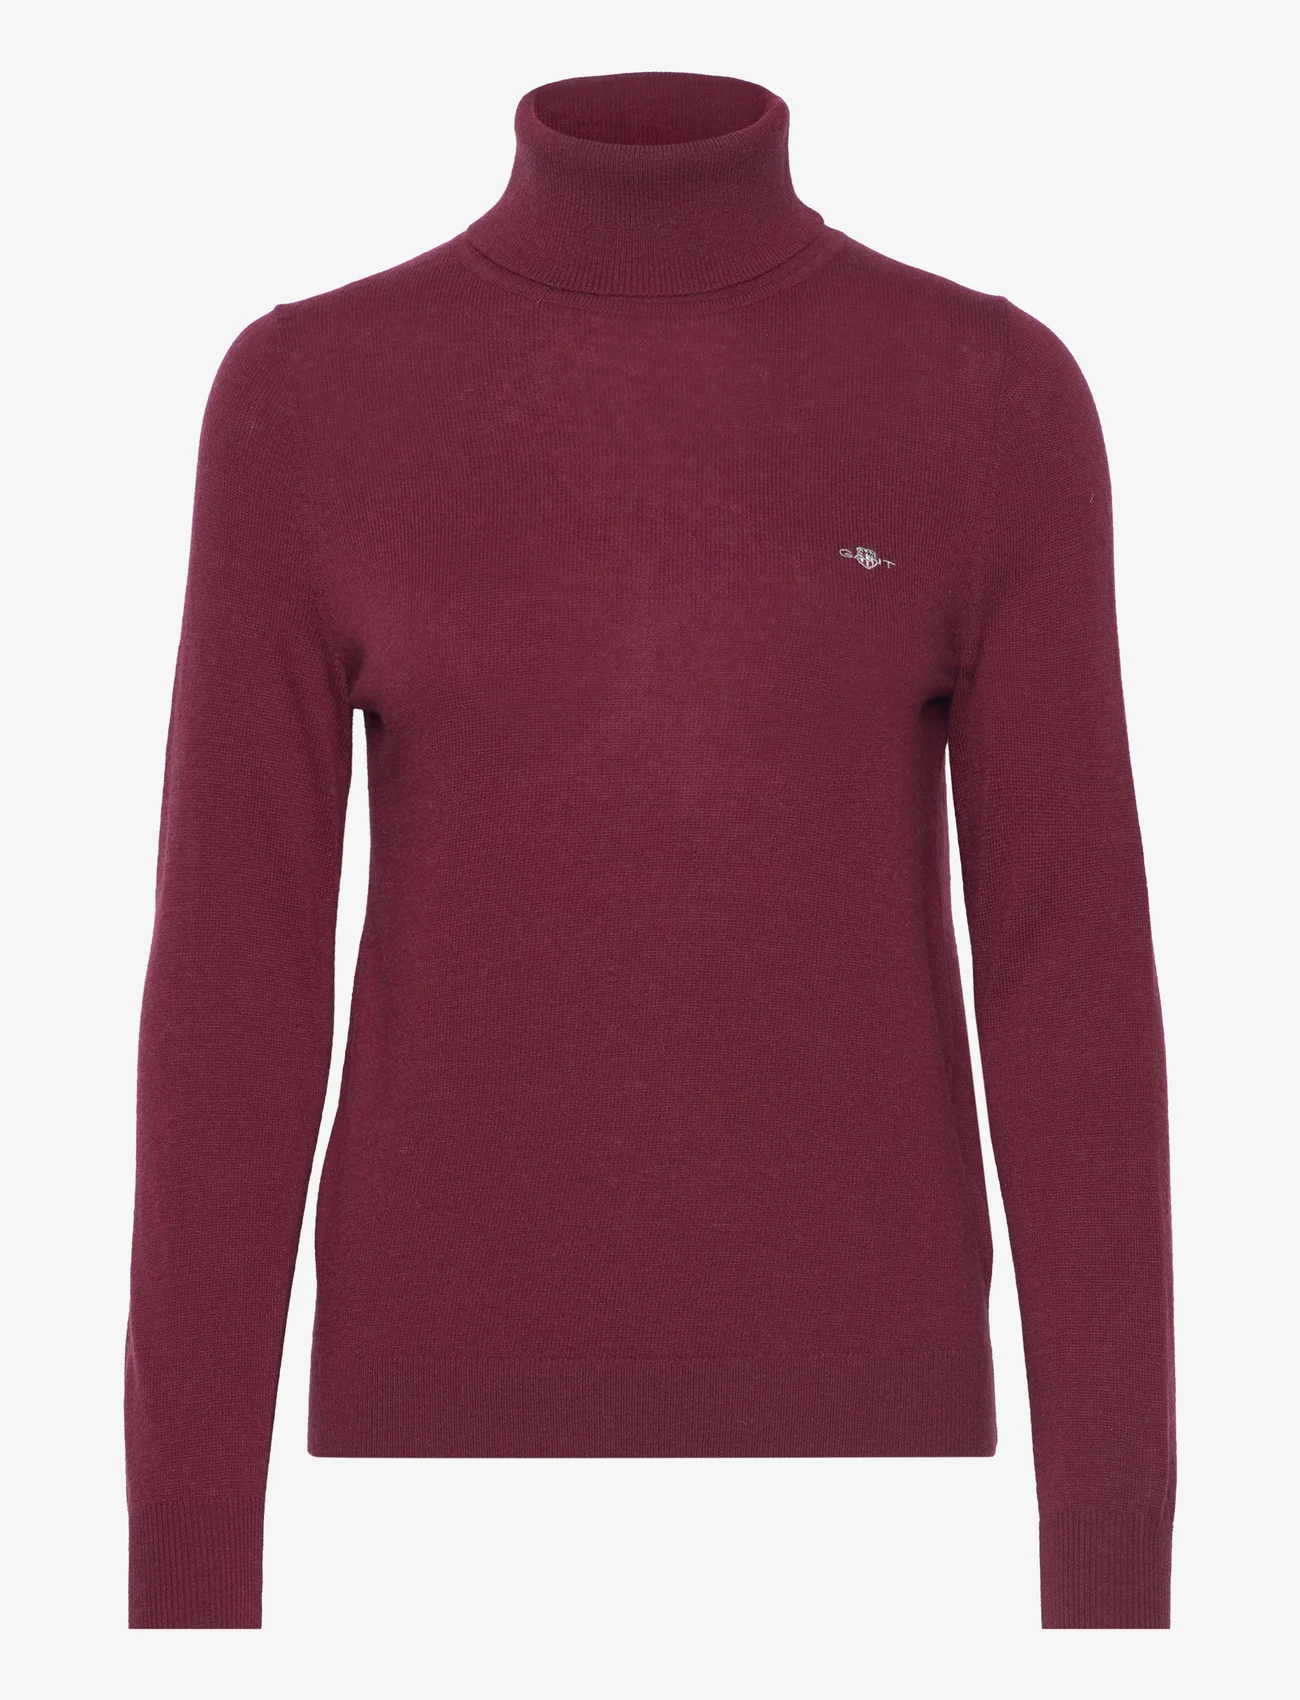 GANT - EXTRAFINE ROLLNECK - poolopaidat - plumped red - 0